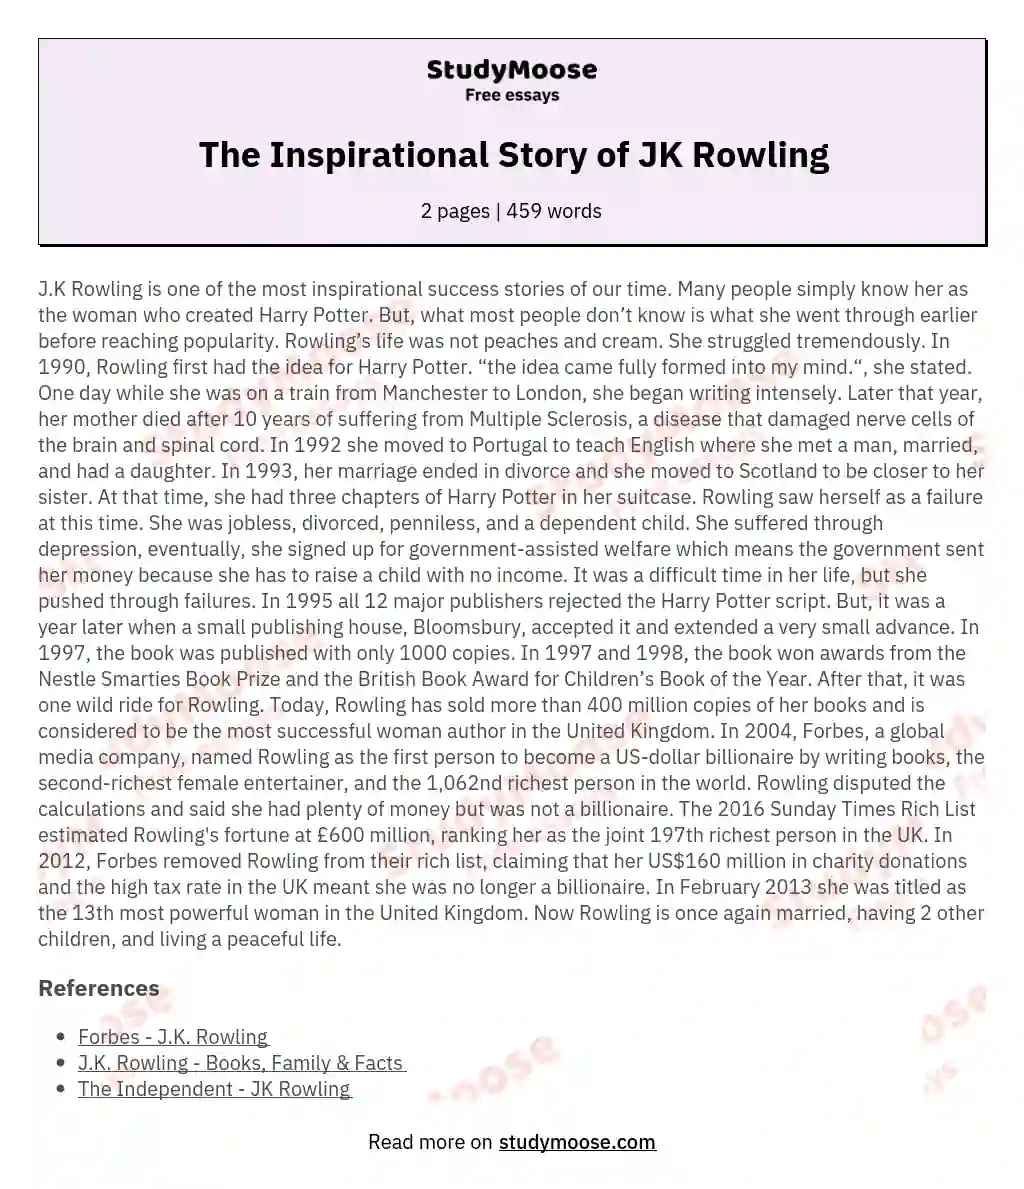 The Inspirational Story of JK Rowling essay